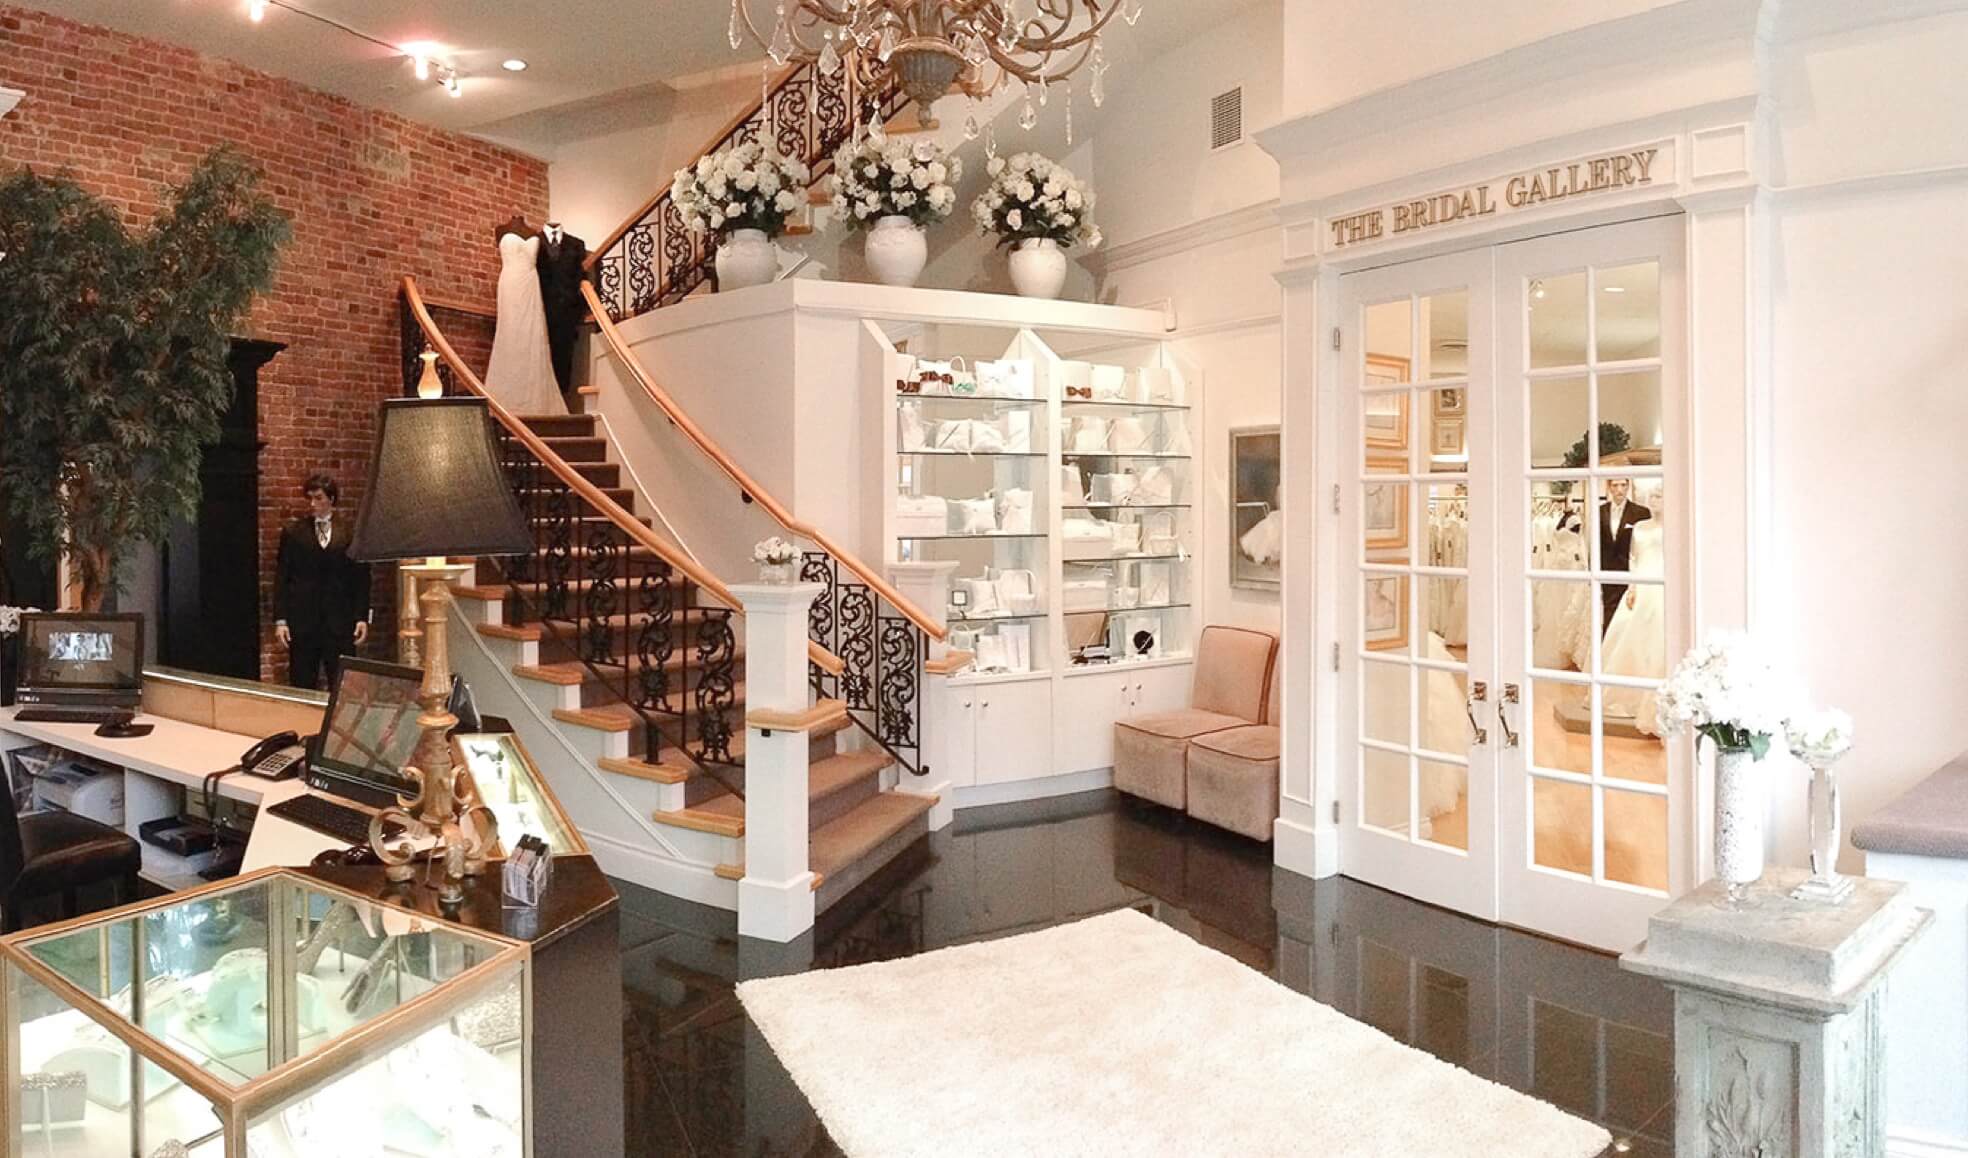 Photo of the bridal gallery boutique